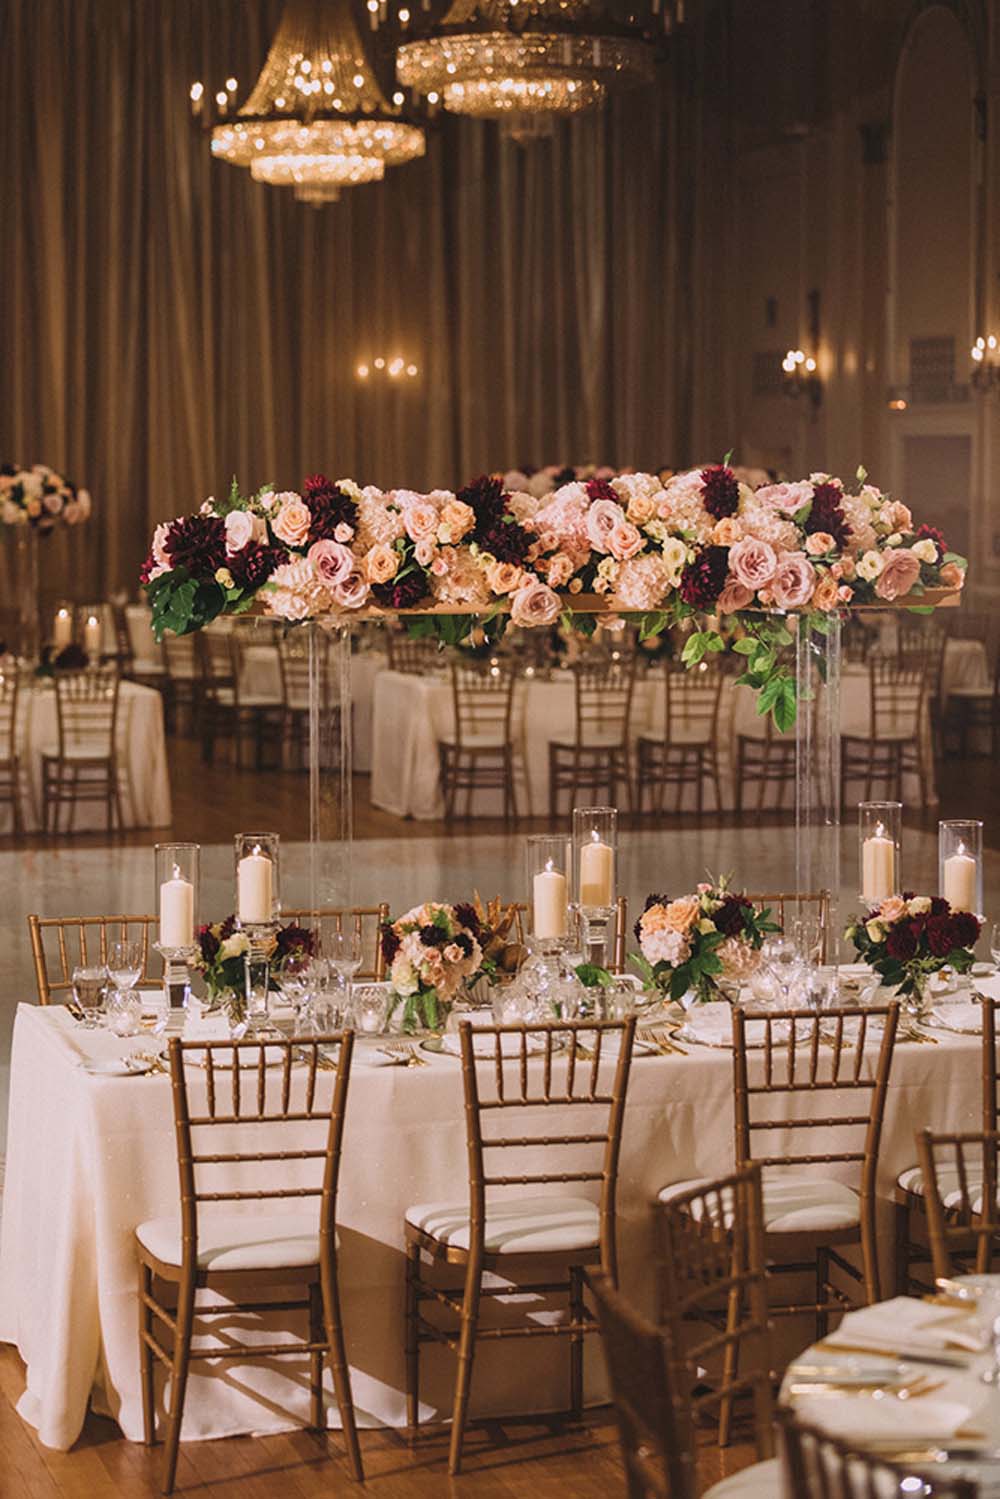 An Elegant Wedding with Cultural Elements - Dining tables